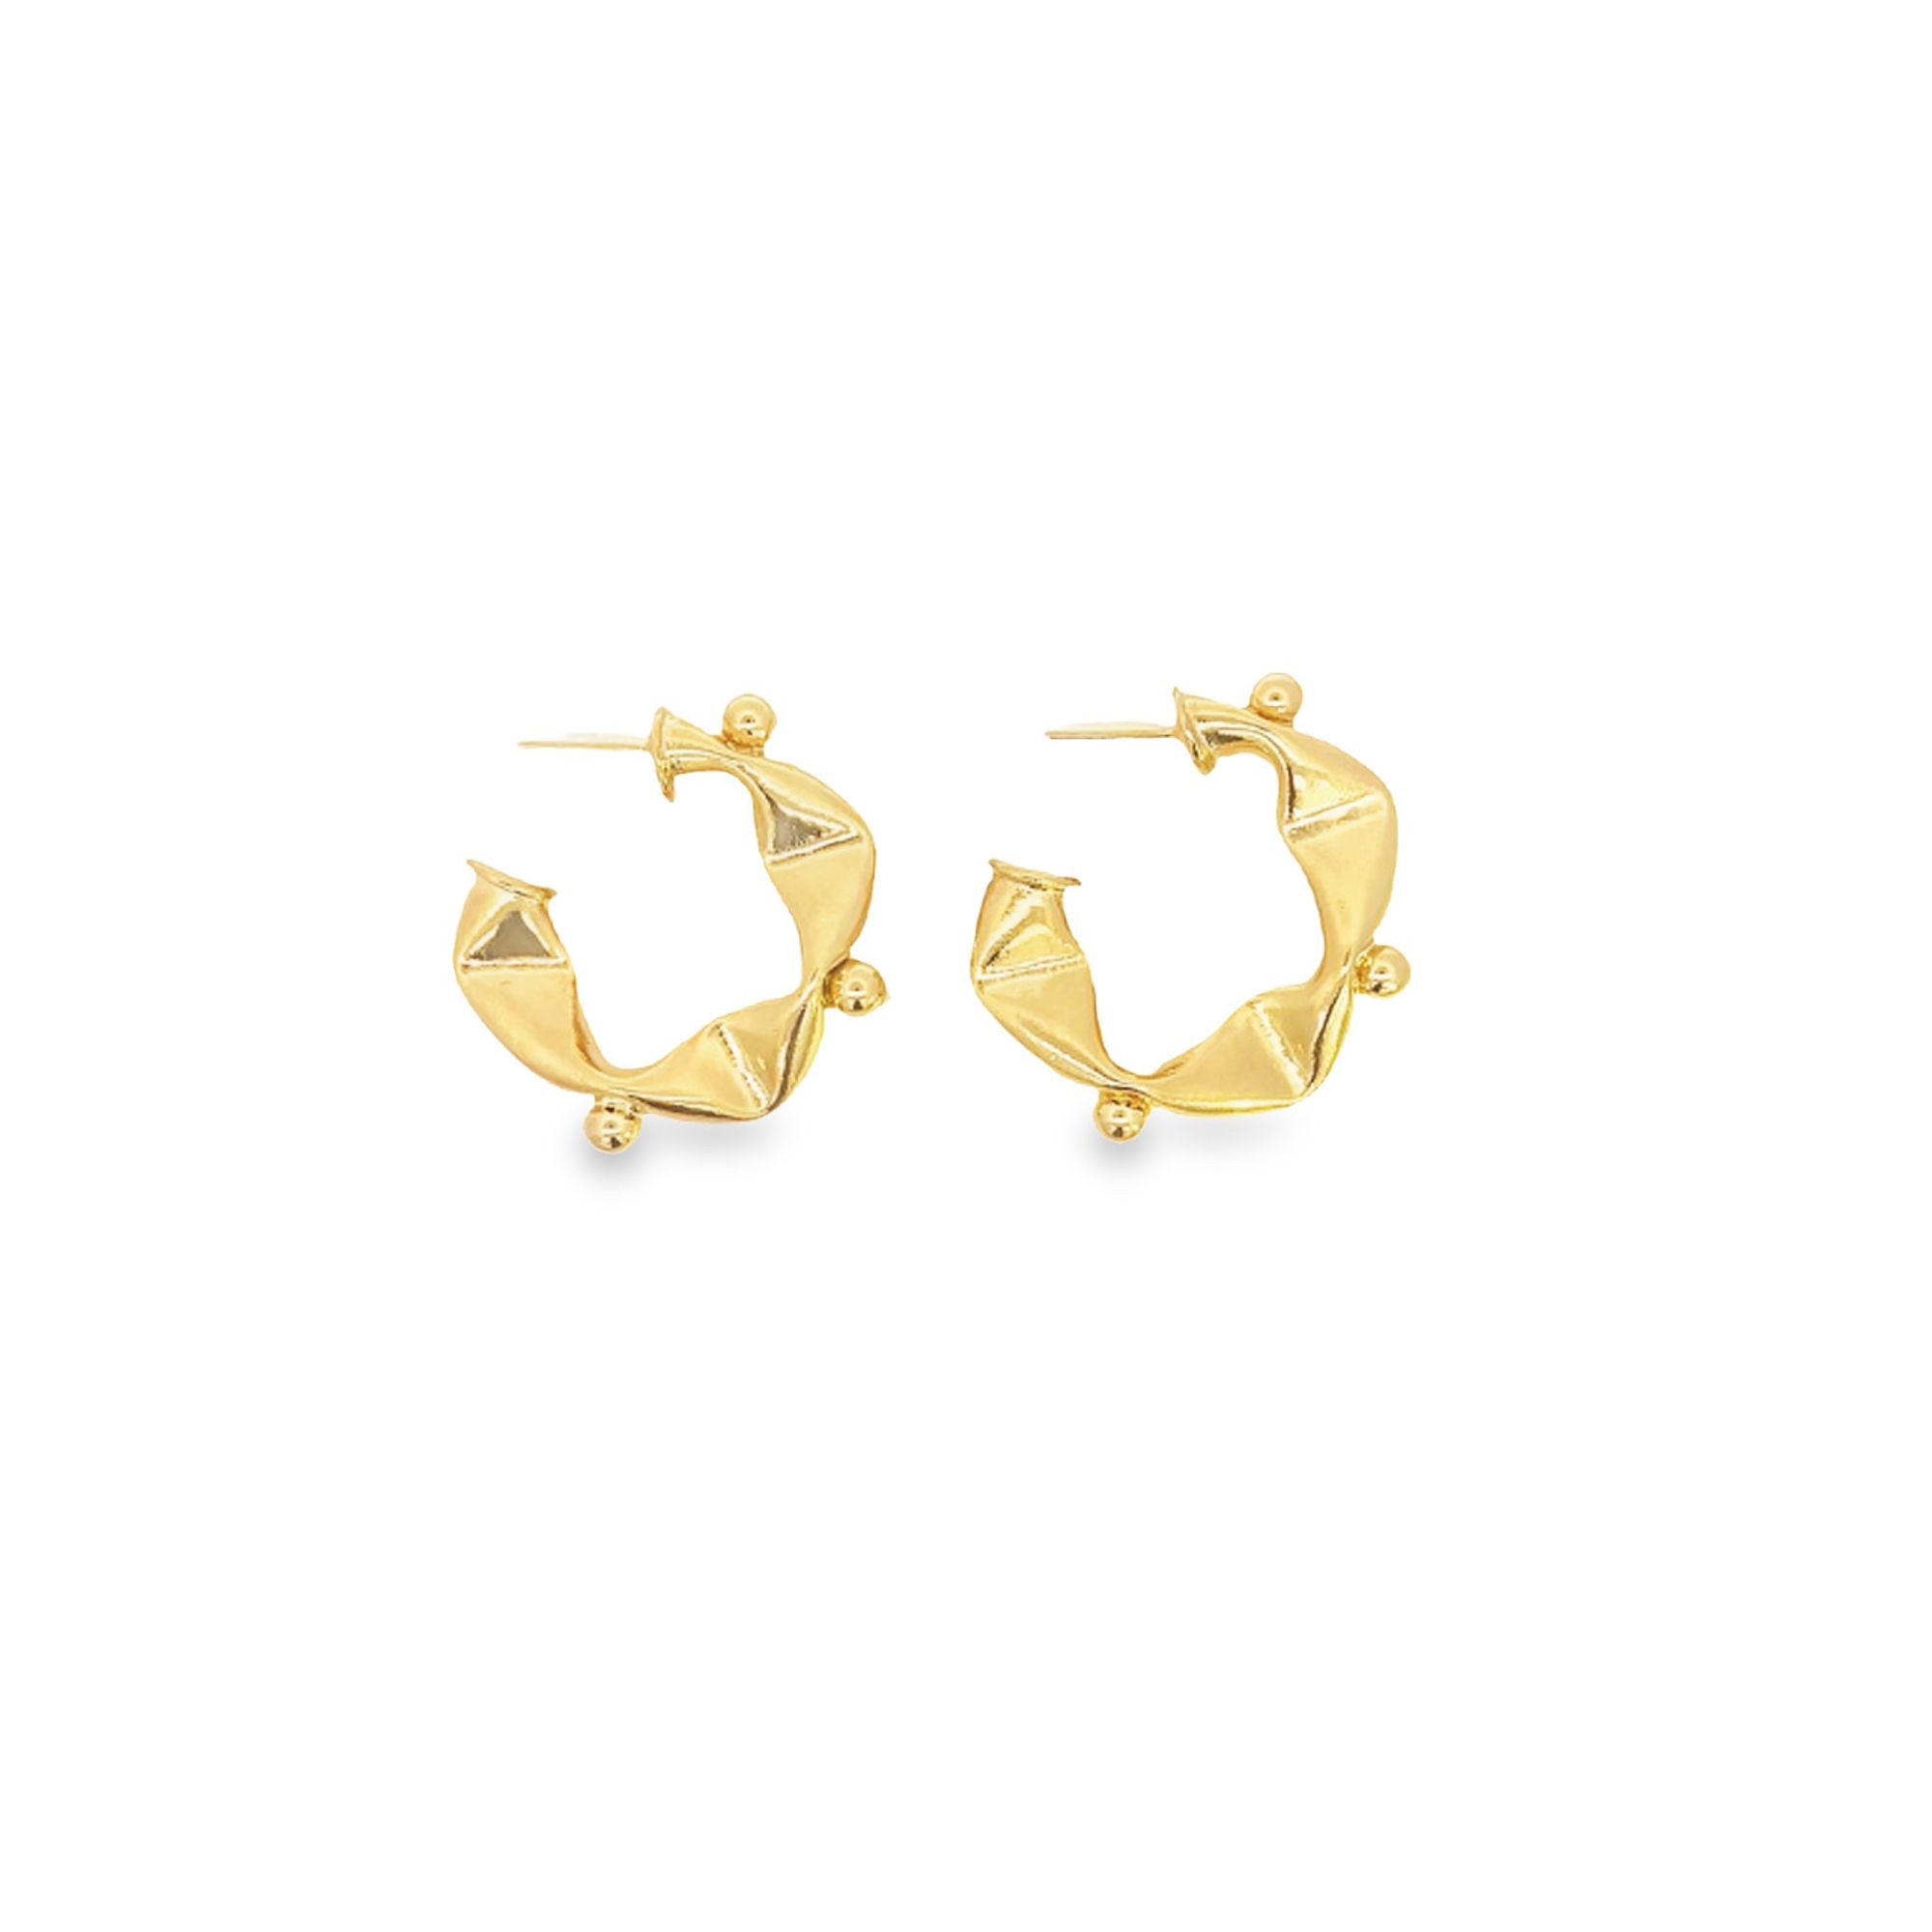 18K Gold Filled Square Abstract Styled Stud Earrings (L398)